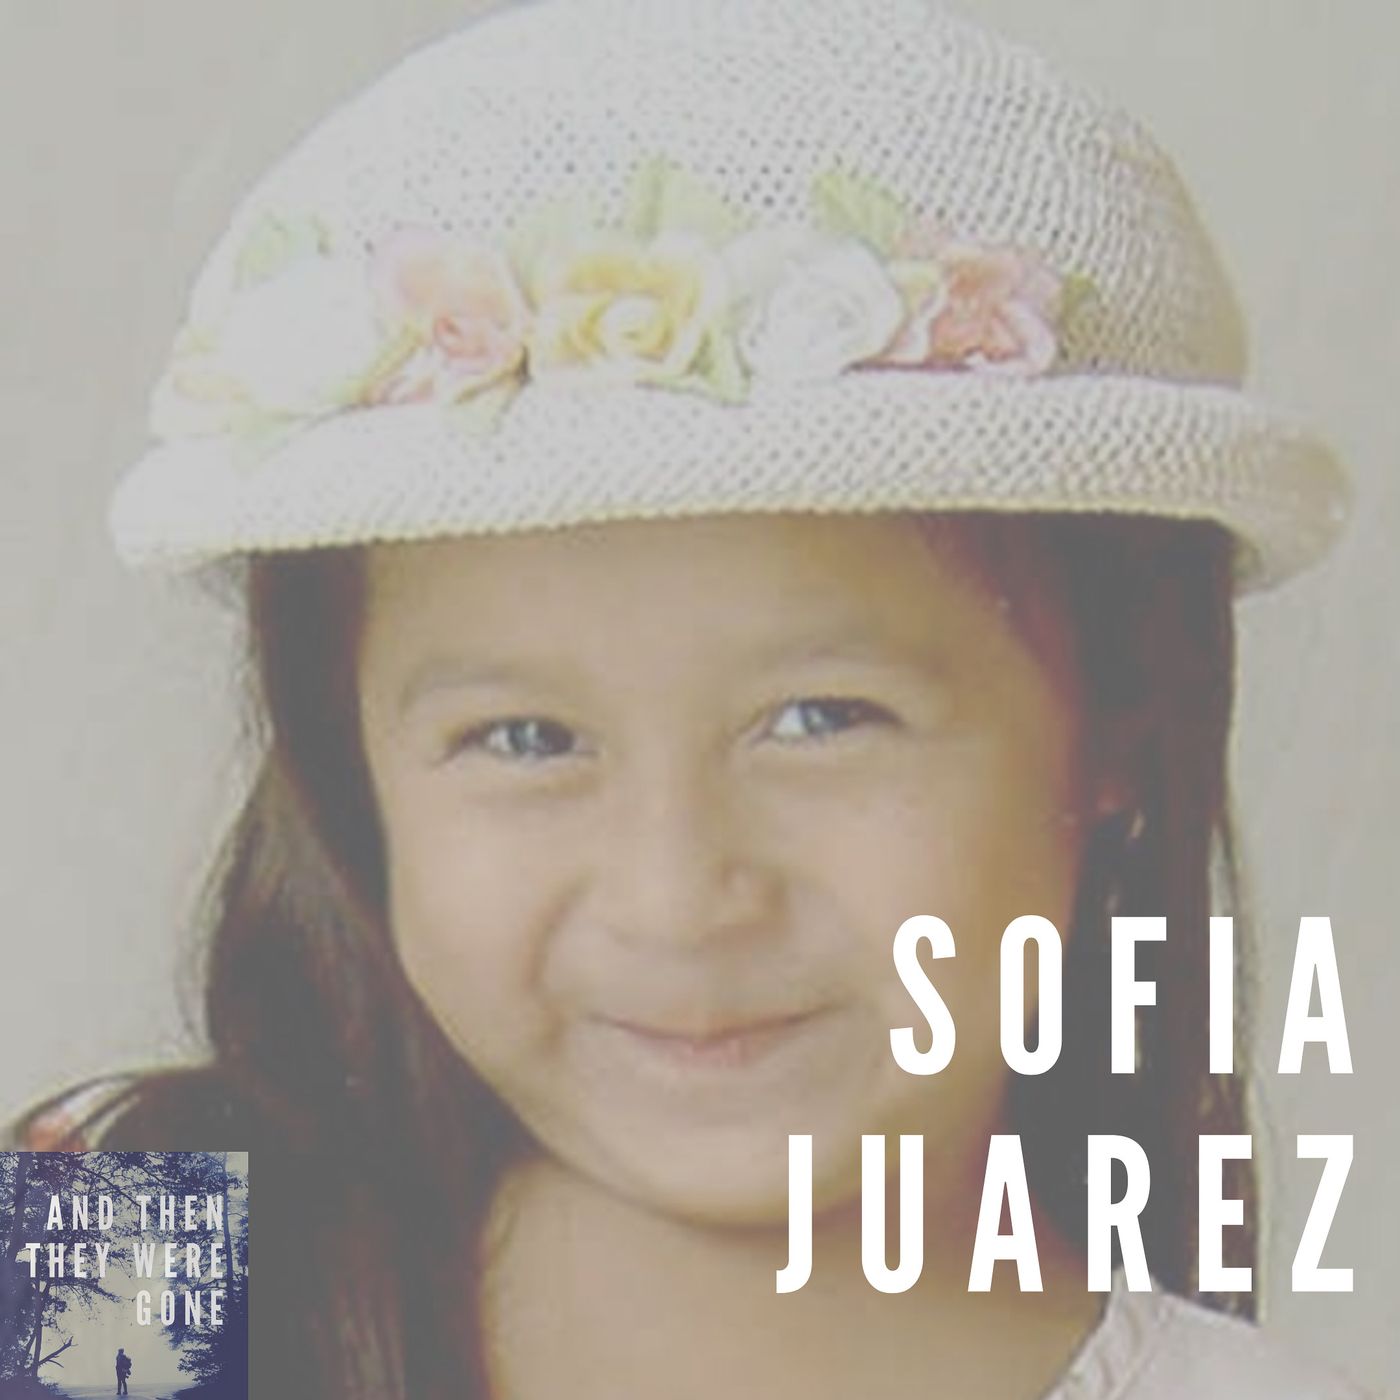 Sofia Juarez by And Then They Were Gone